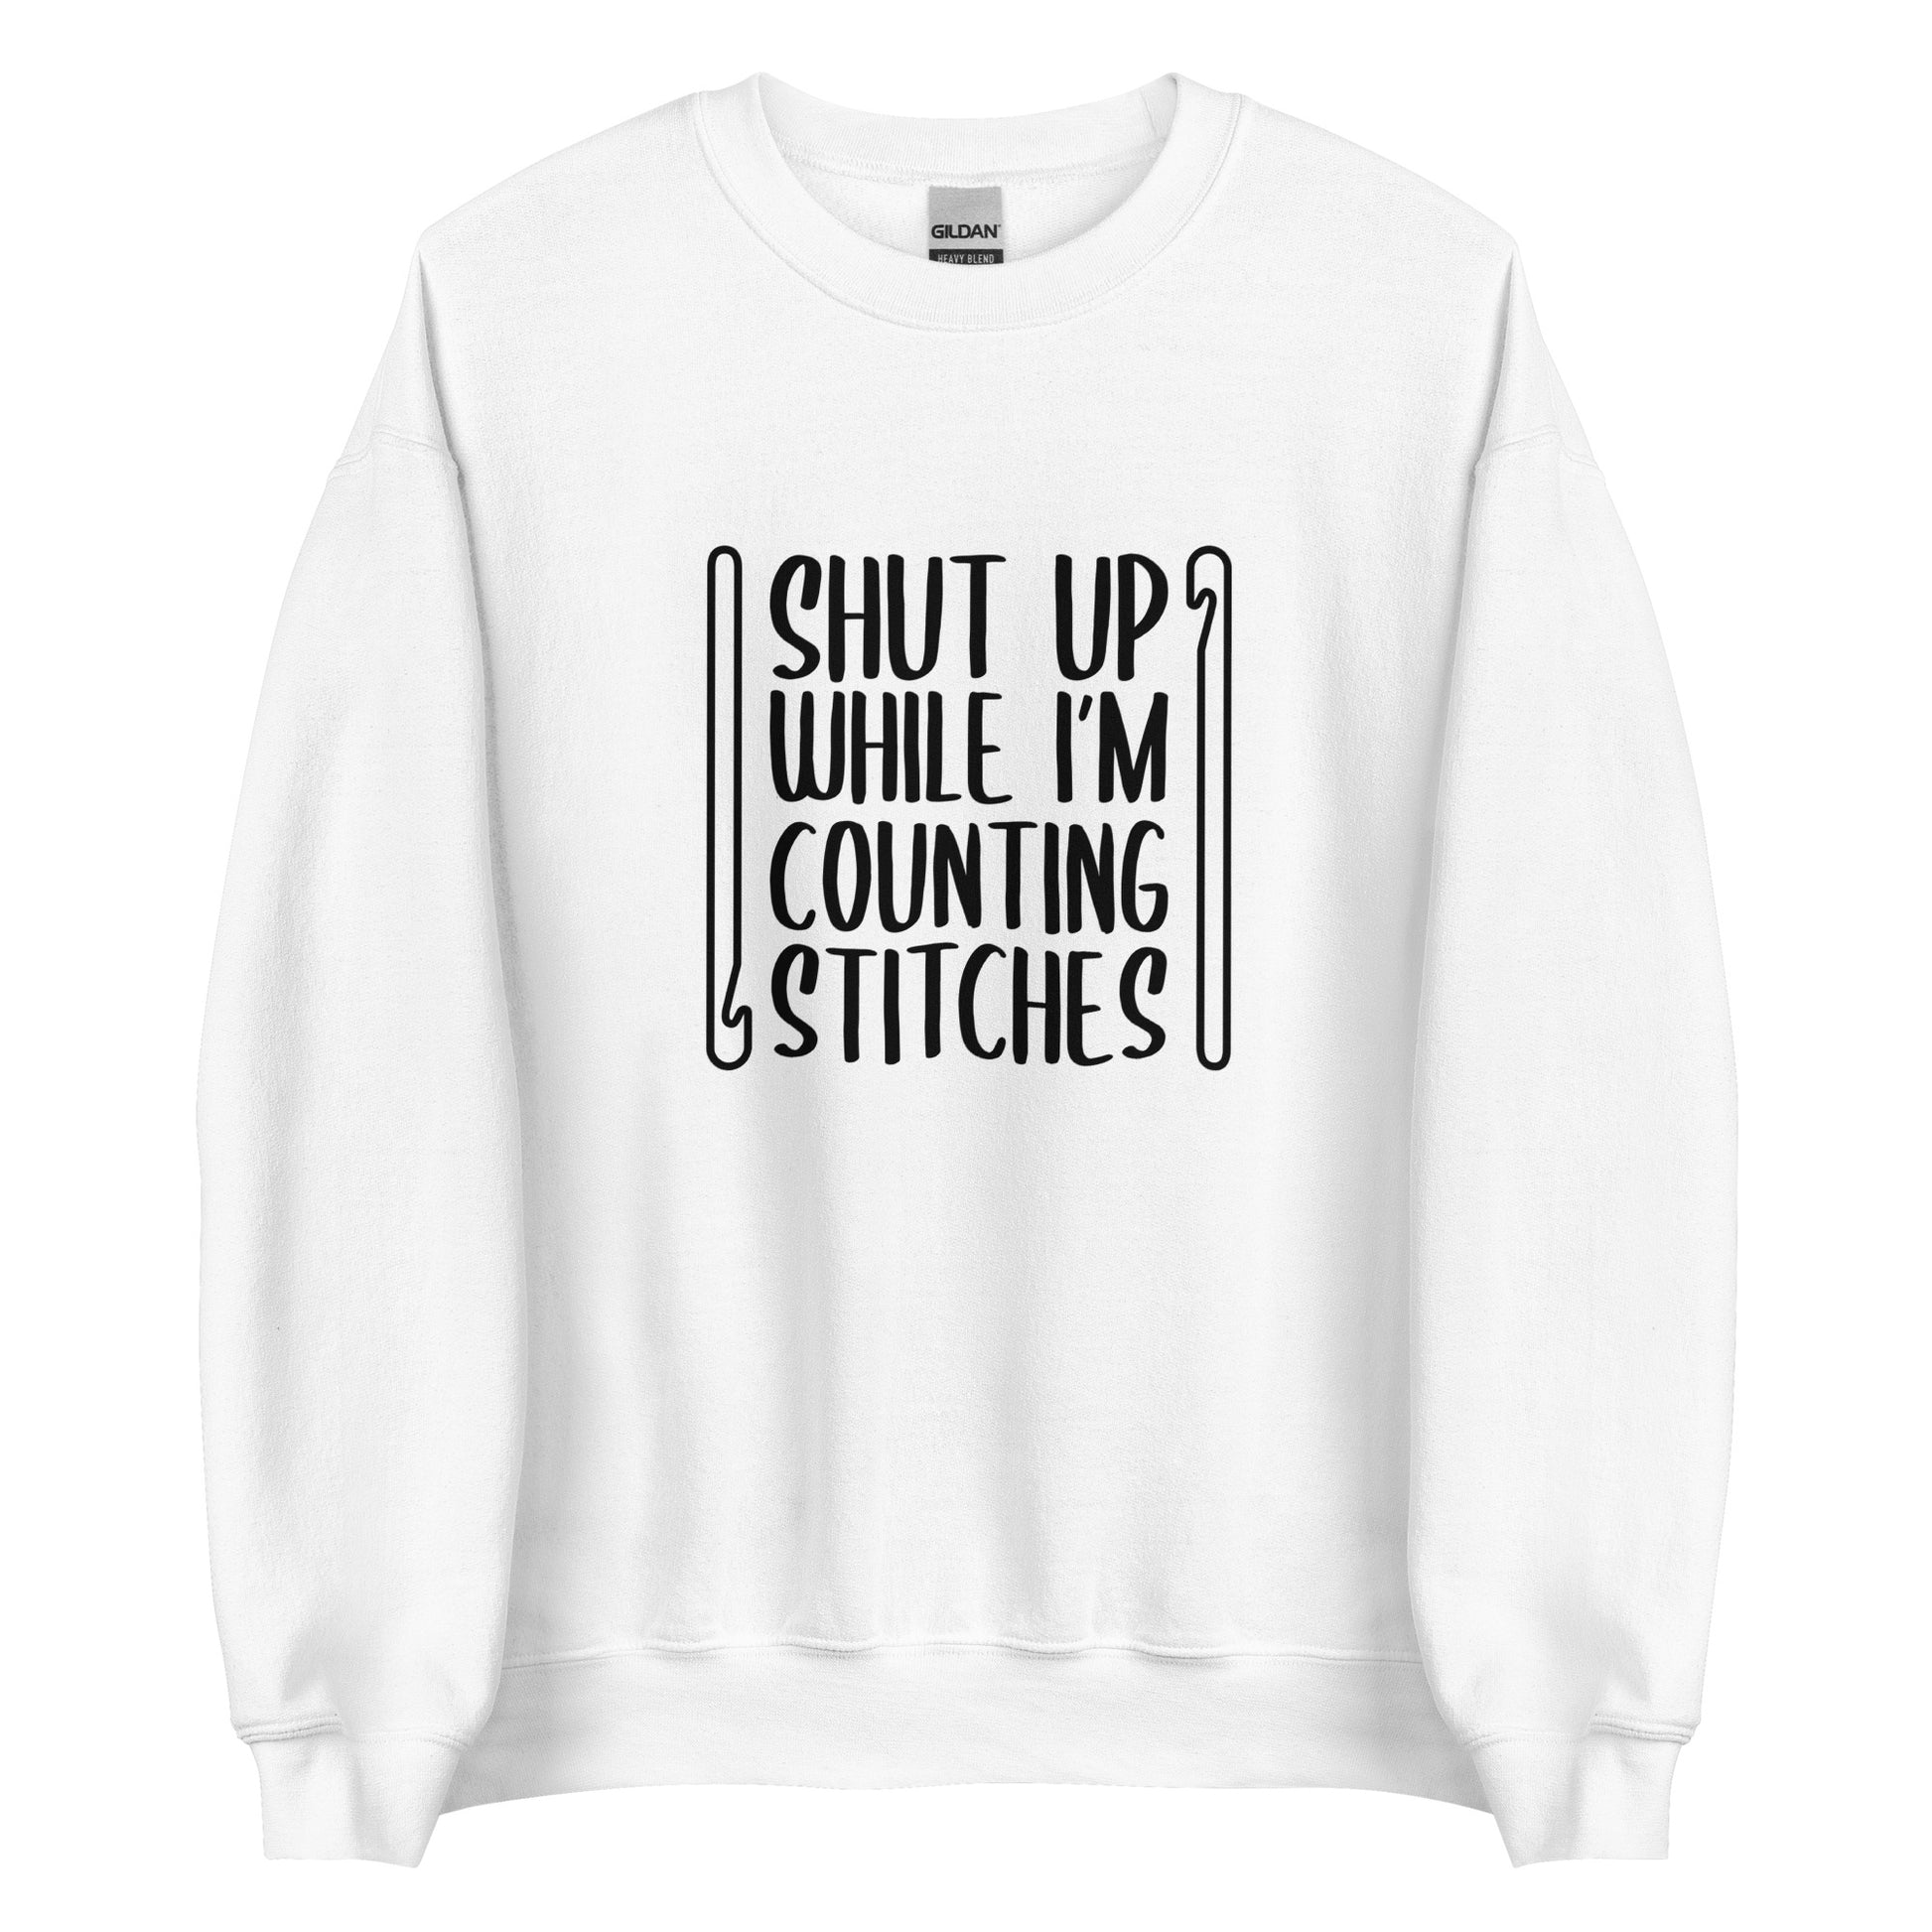 A white crewneck sweatshirt featuring black text that reads "Shut up while I'm counting stitches." The text is framed by a crochet hook to the left and right.